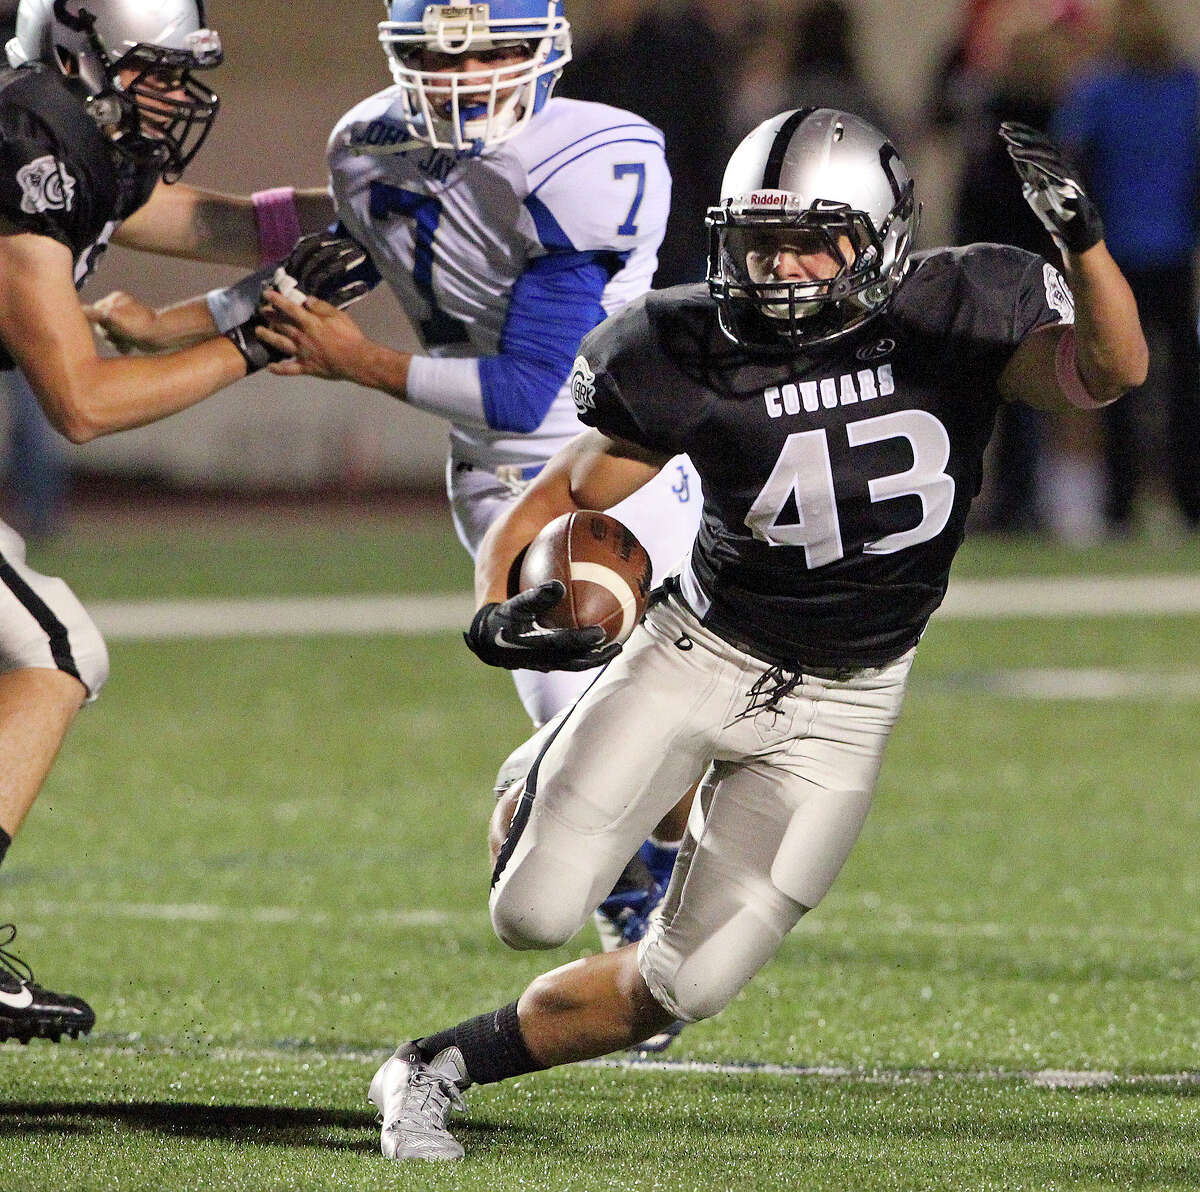 Branden Valle makes a quick cut upfield for the Cougars as Jay plays Clark at Farris Stadium on October 17, 2013.